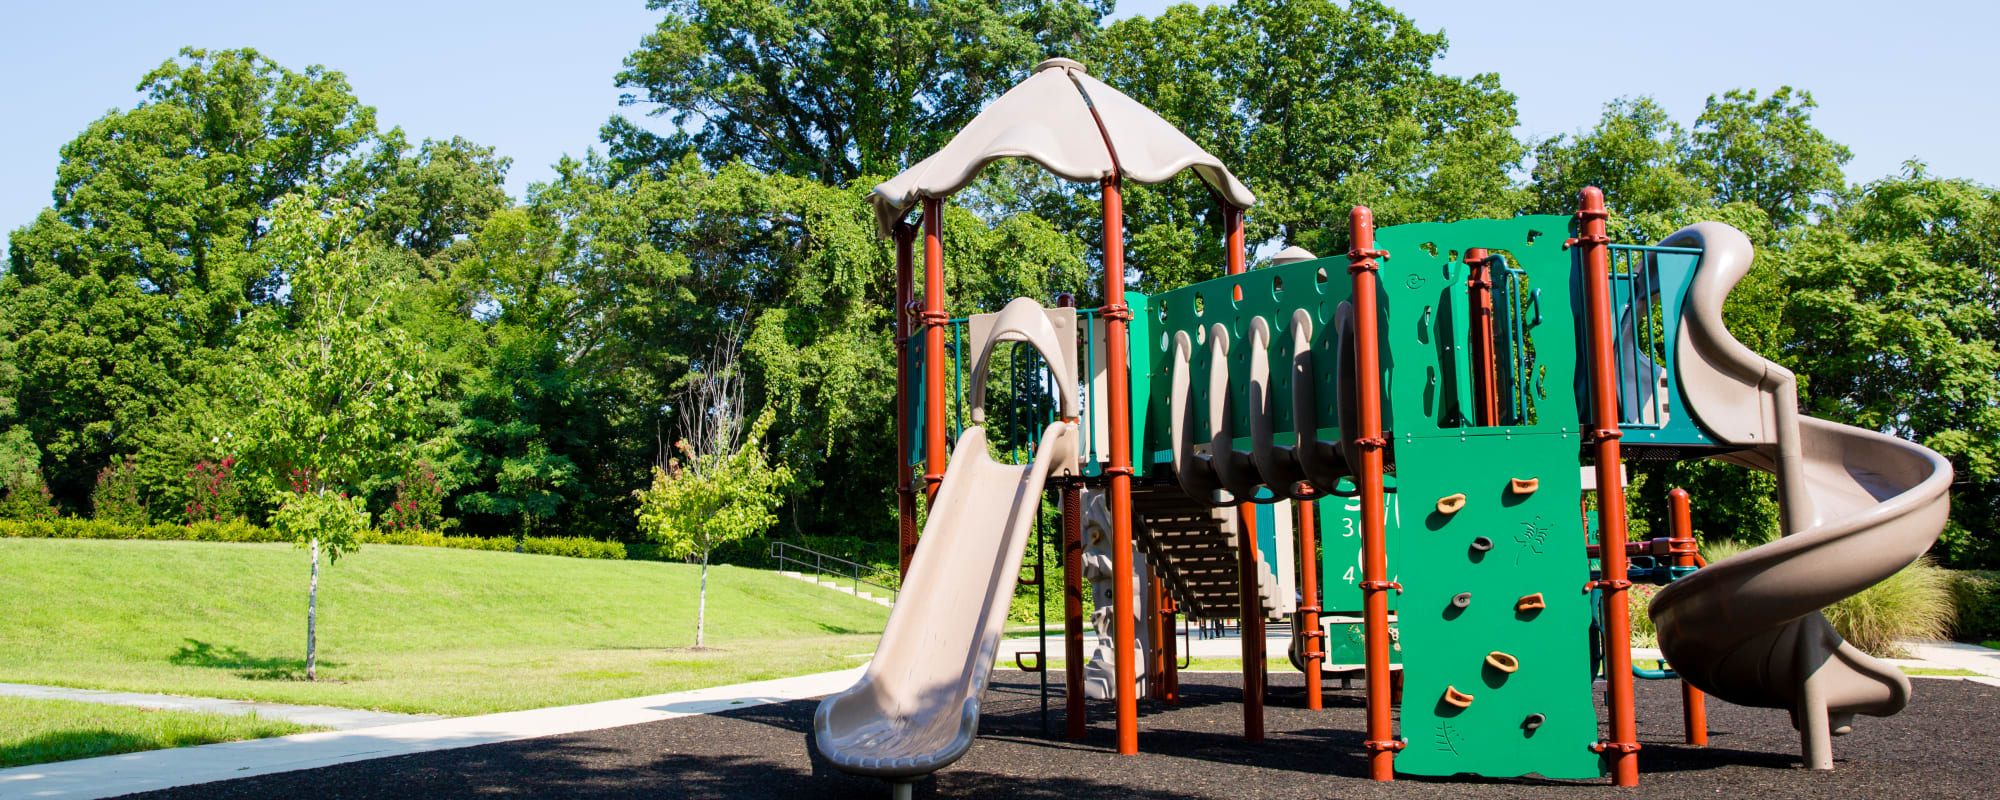 the playground at Arundel Estates in Annapolis, Maryland